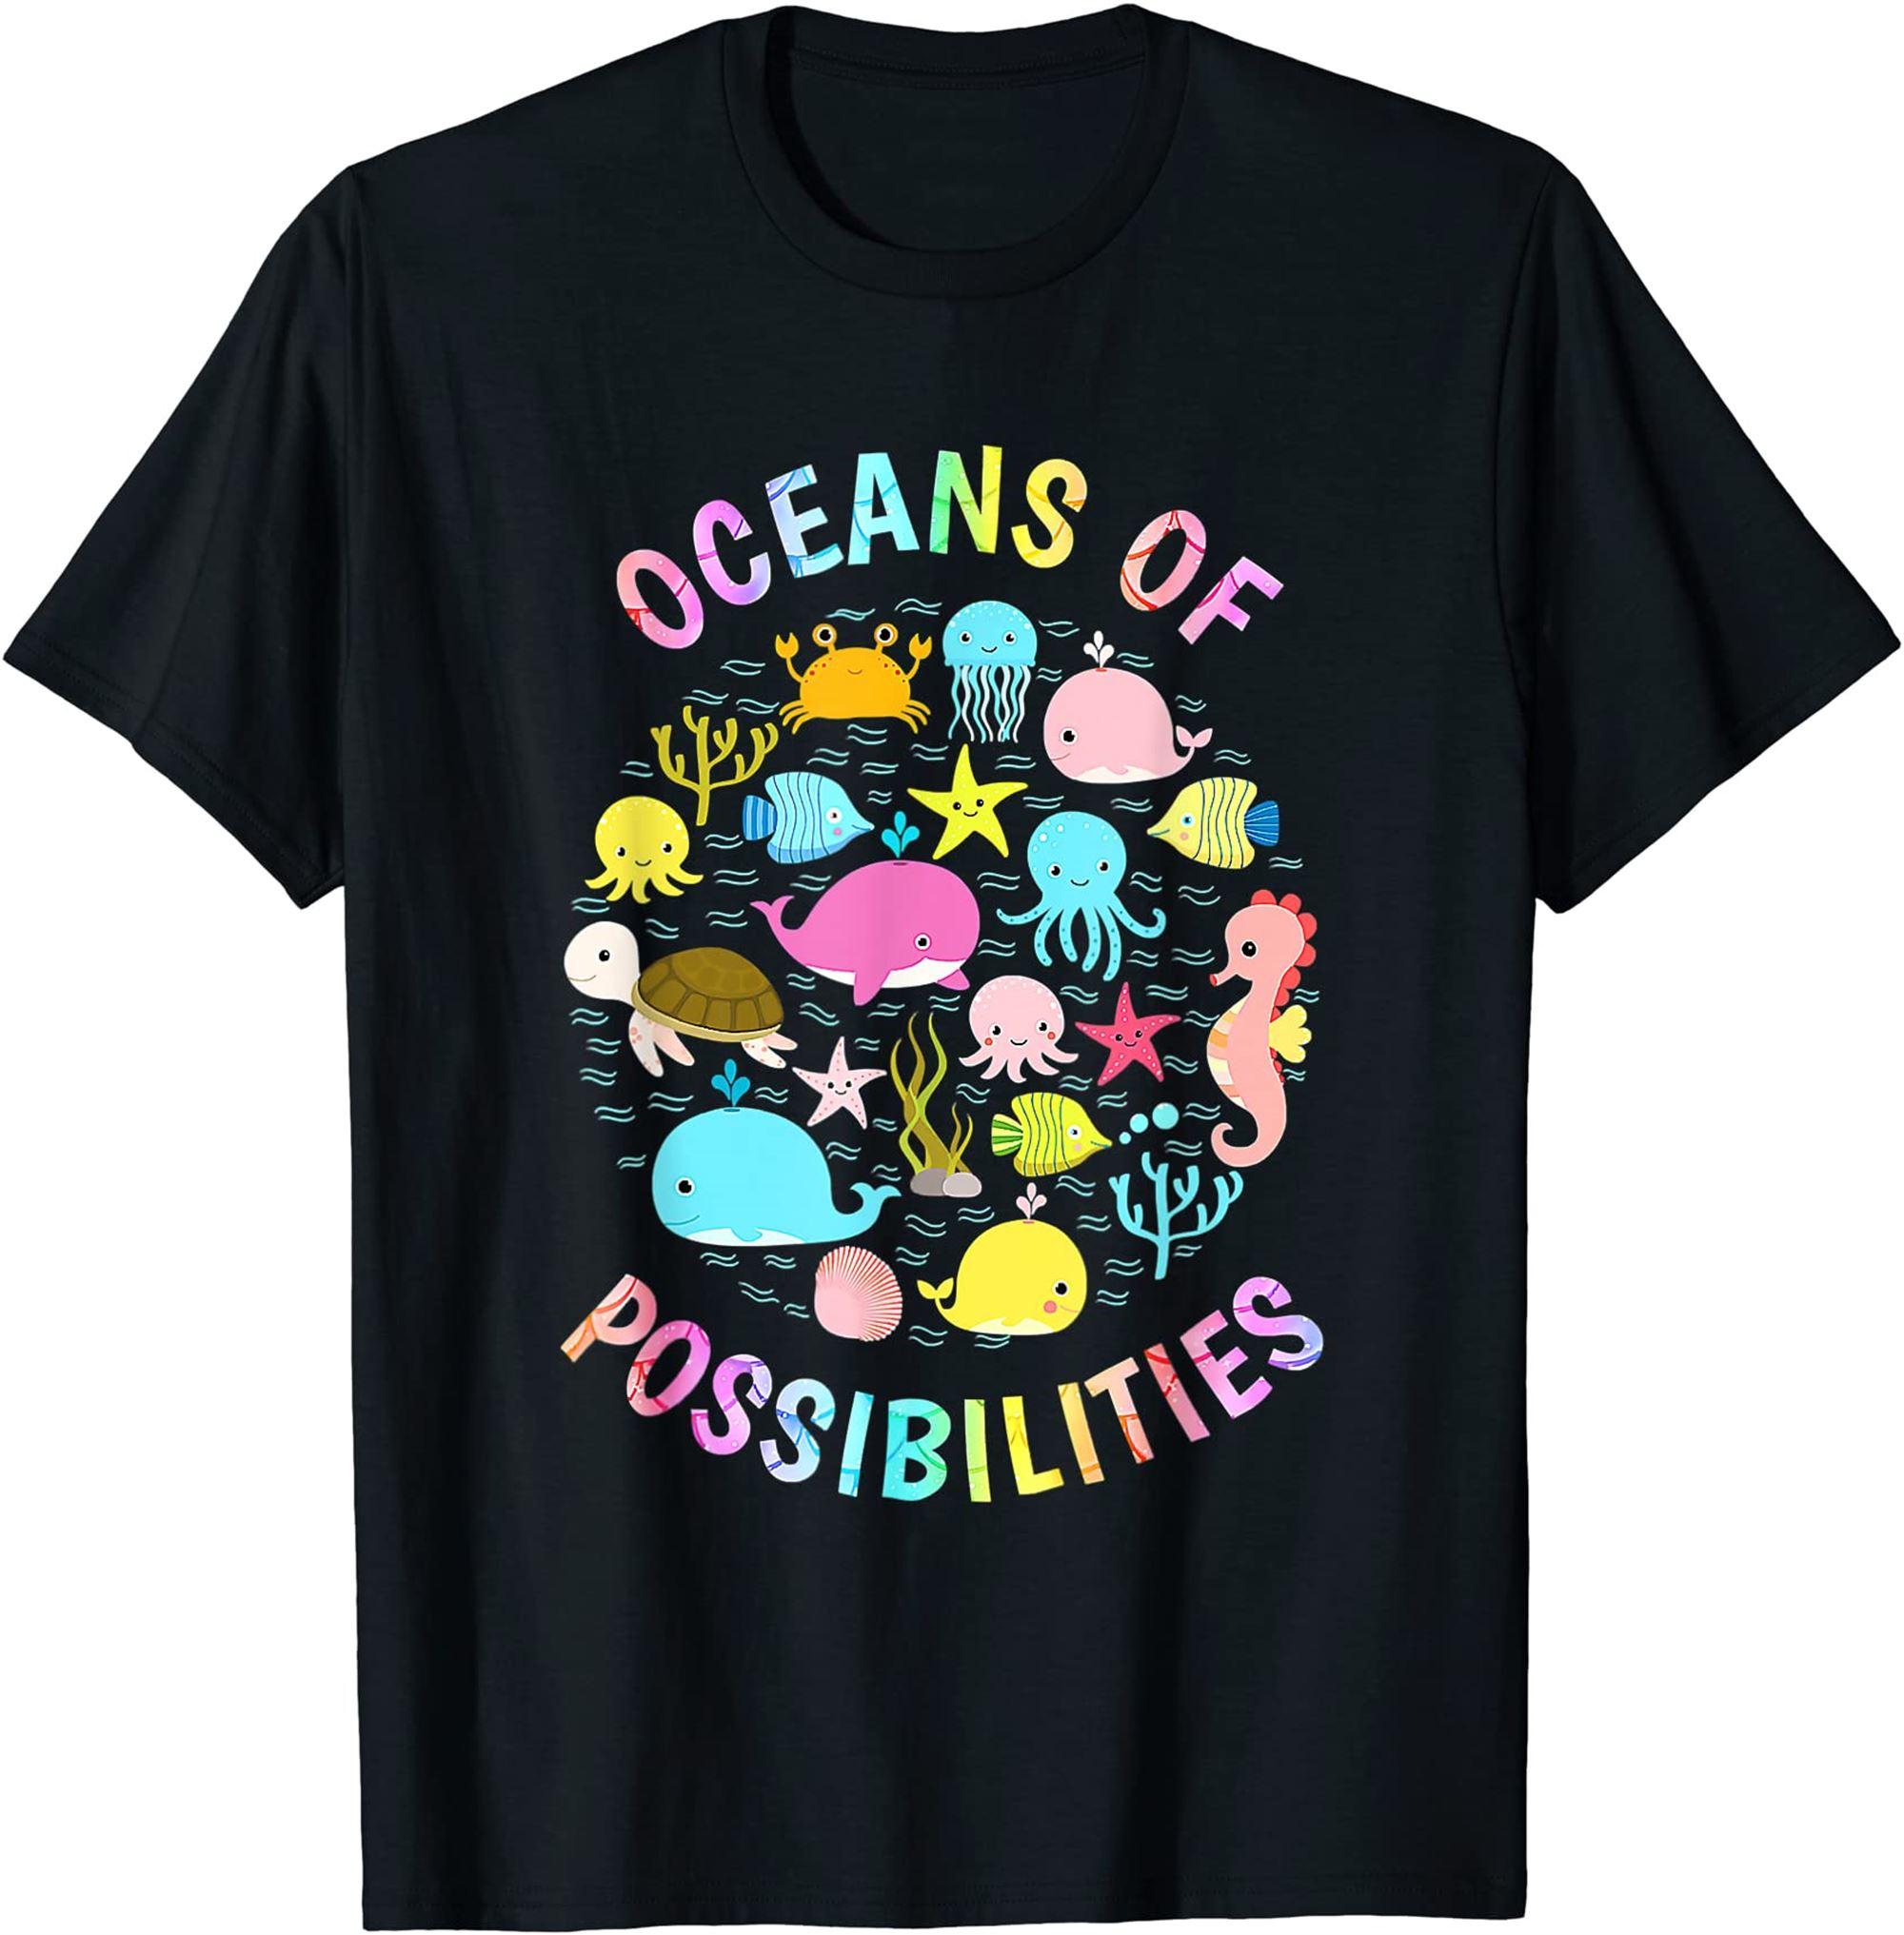 Cute Oceans Of Possibilities Summer Reading Sea Creatures T-shirt Plus Size Up To 5xl